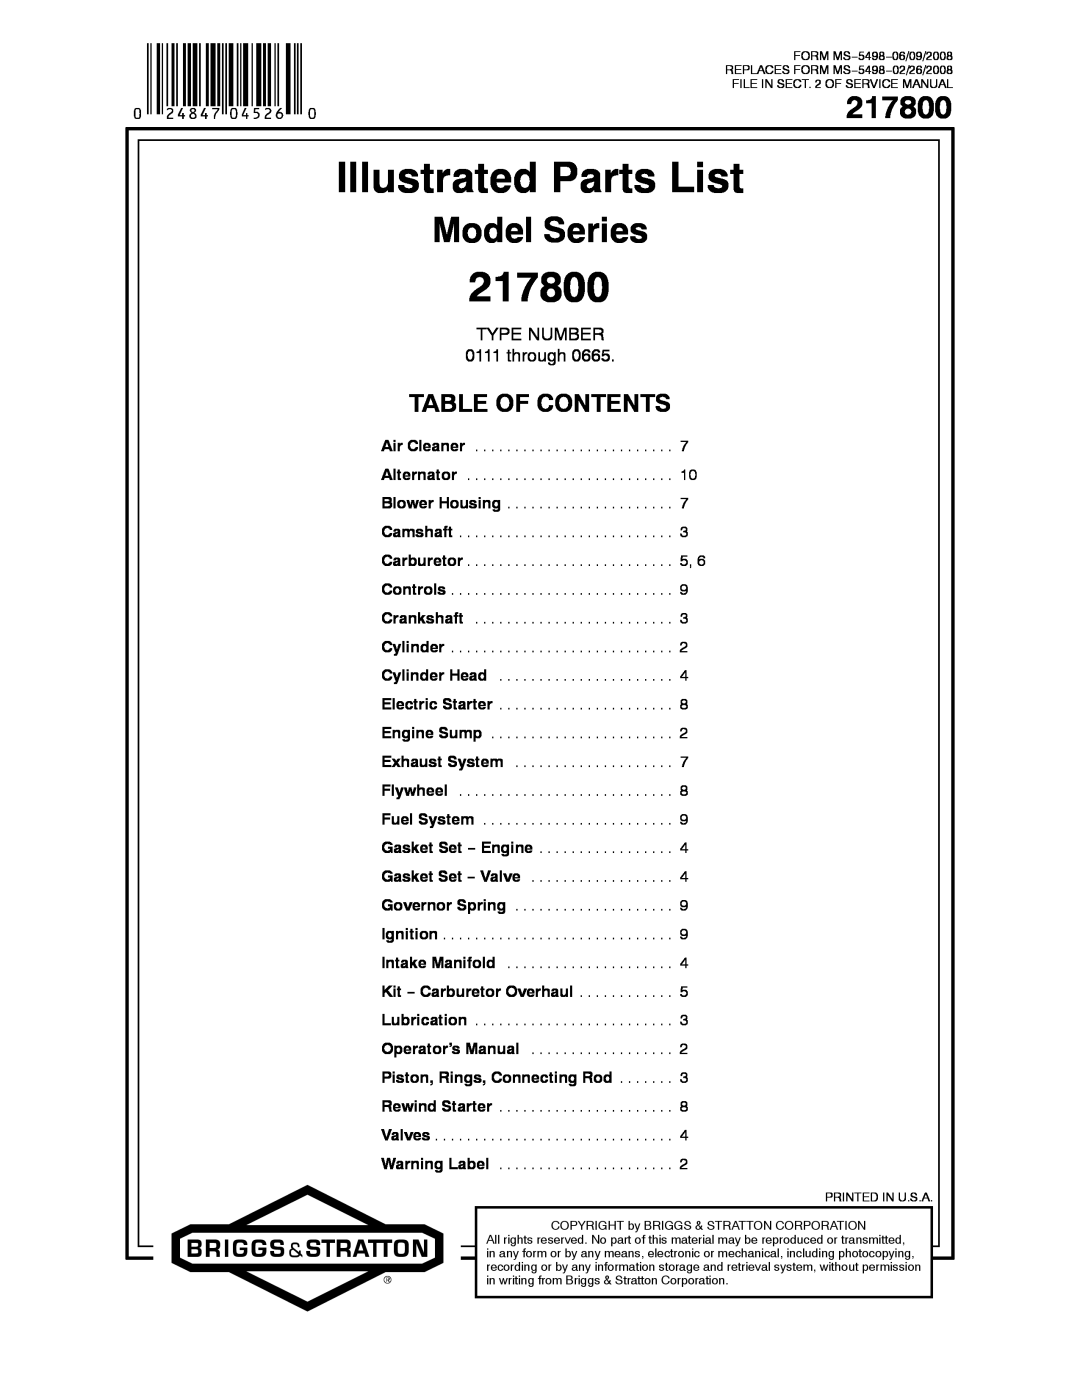 Briggs & Stratton 217800 service manual Model Series, Illustrated Parts List, Table Of Contents, TYPE NUMBER 0111 through 